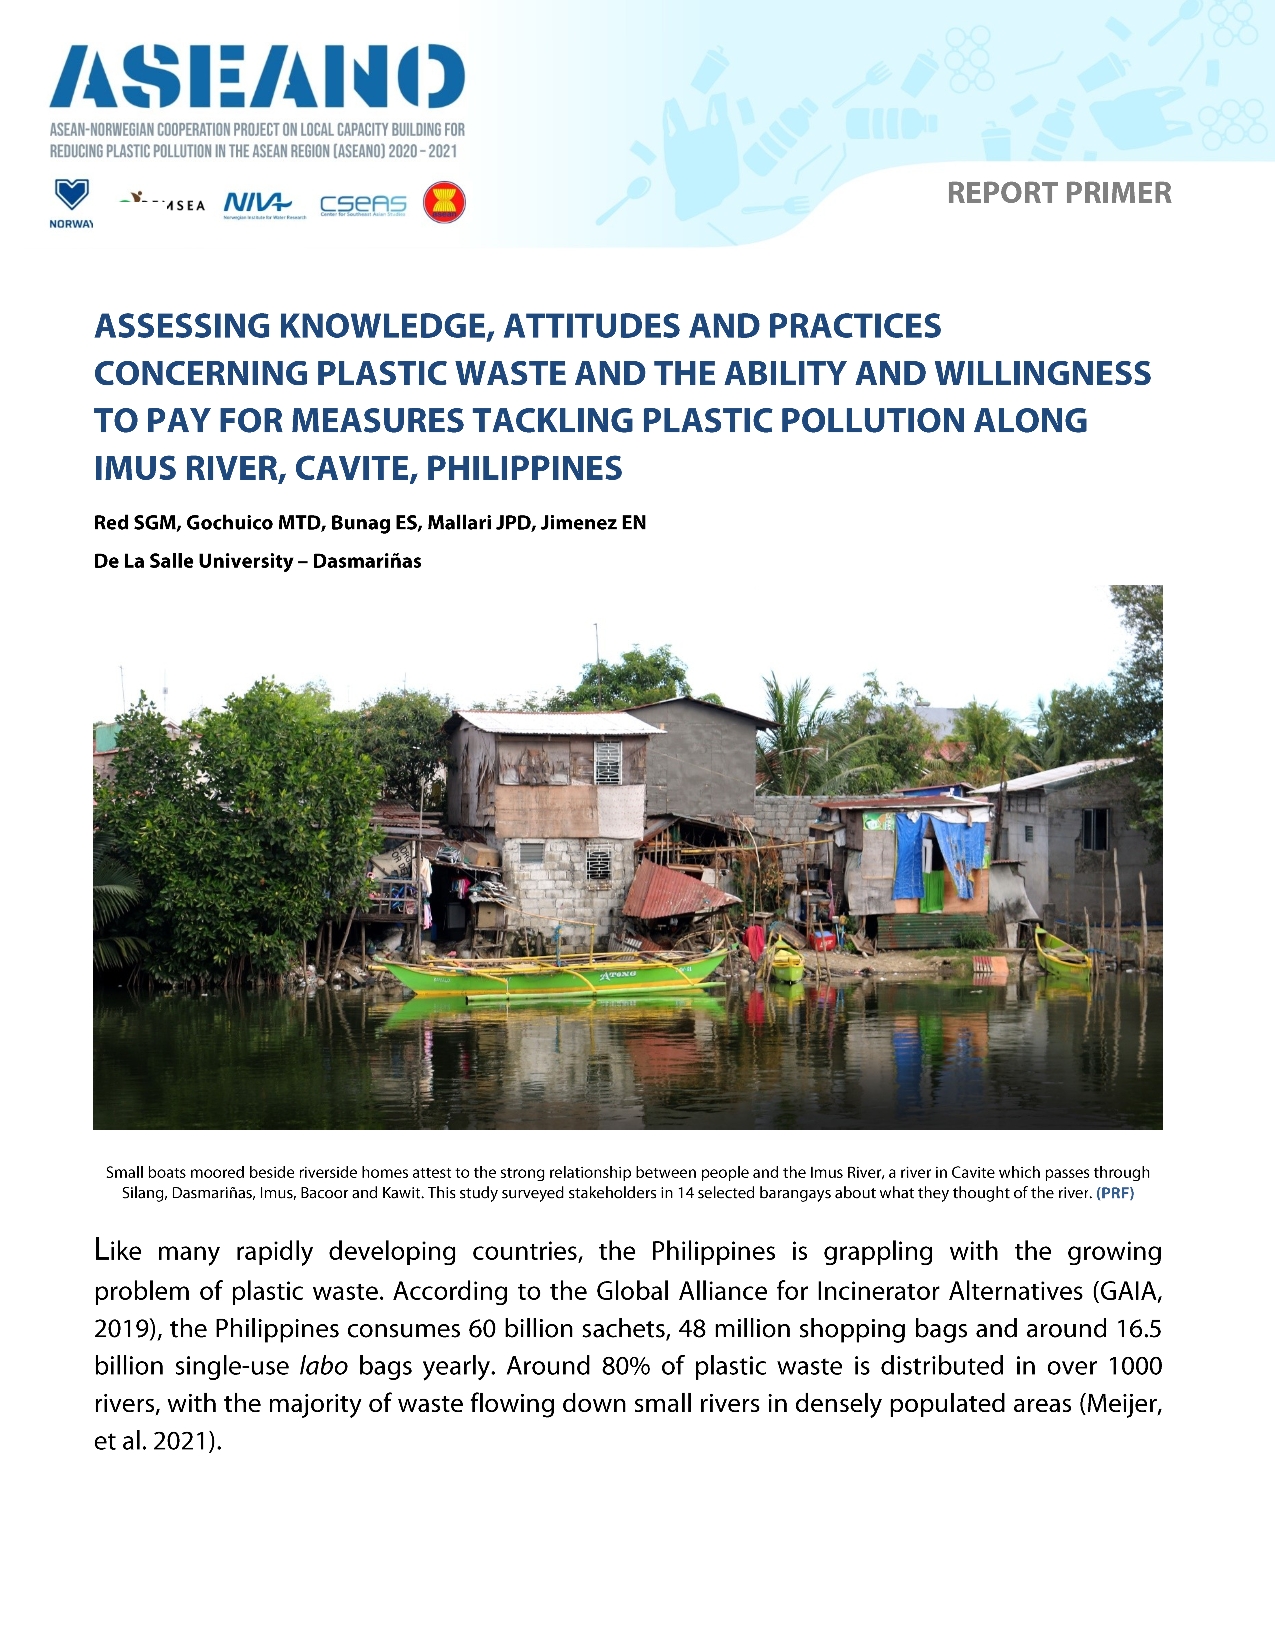 ASEANO Primer: Assessing Knowledge, Attitudes and Practices Concerning Plastic Waste Along Imus River